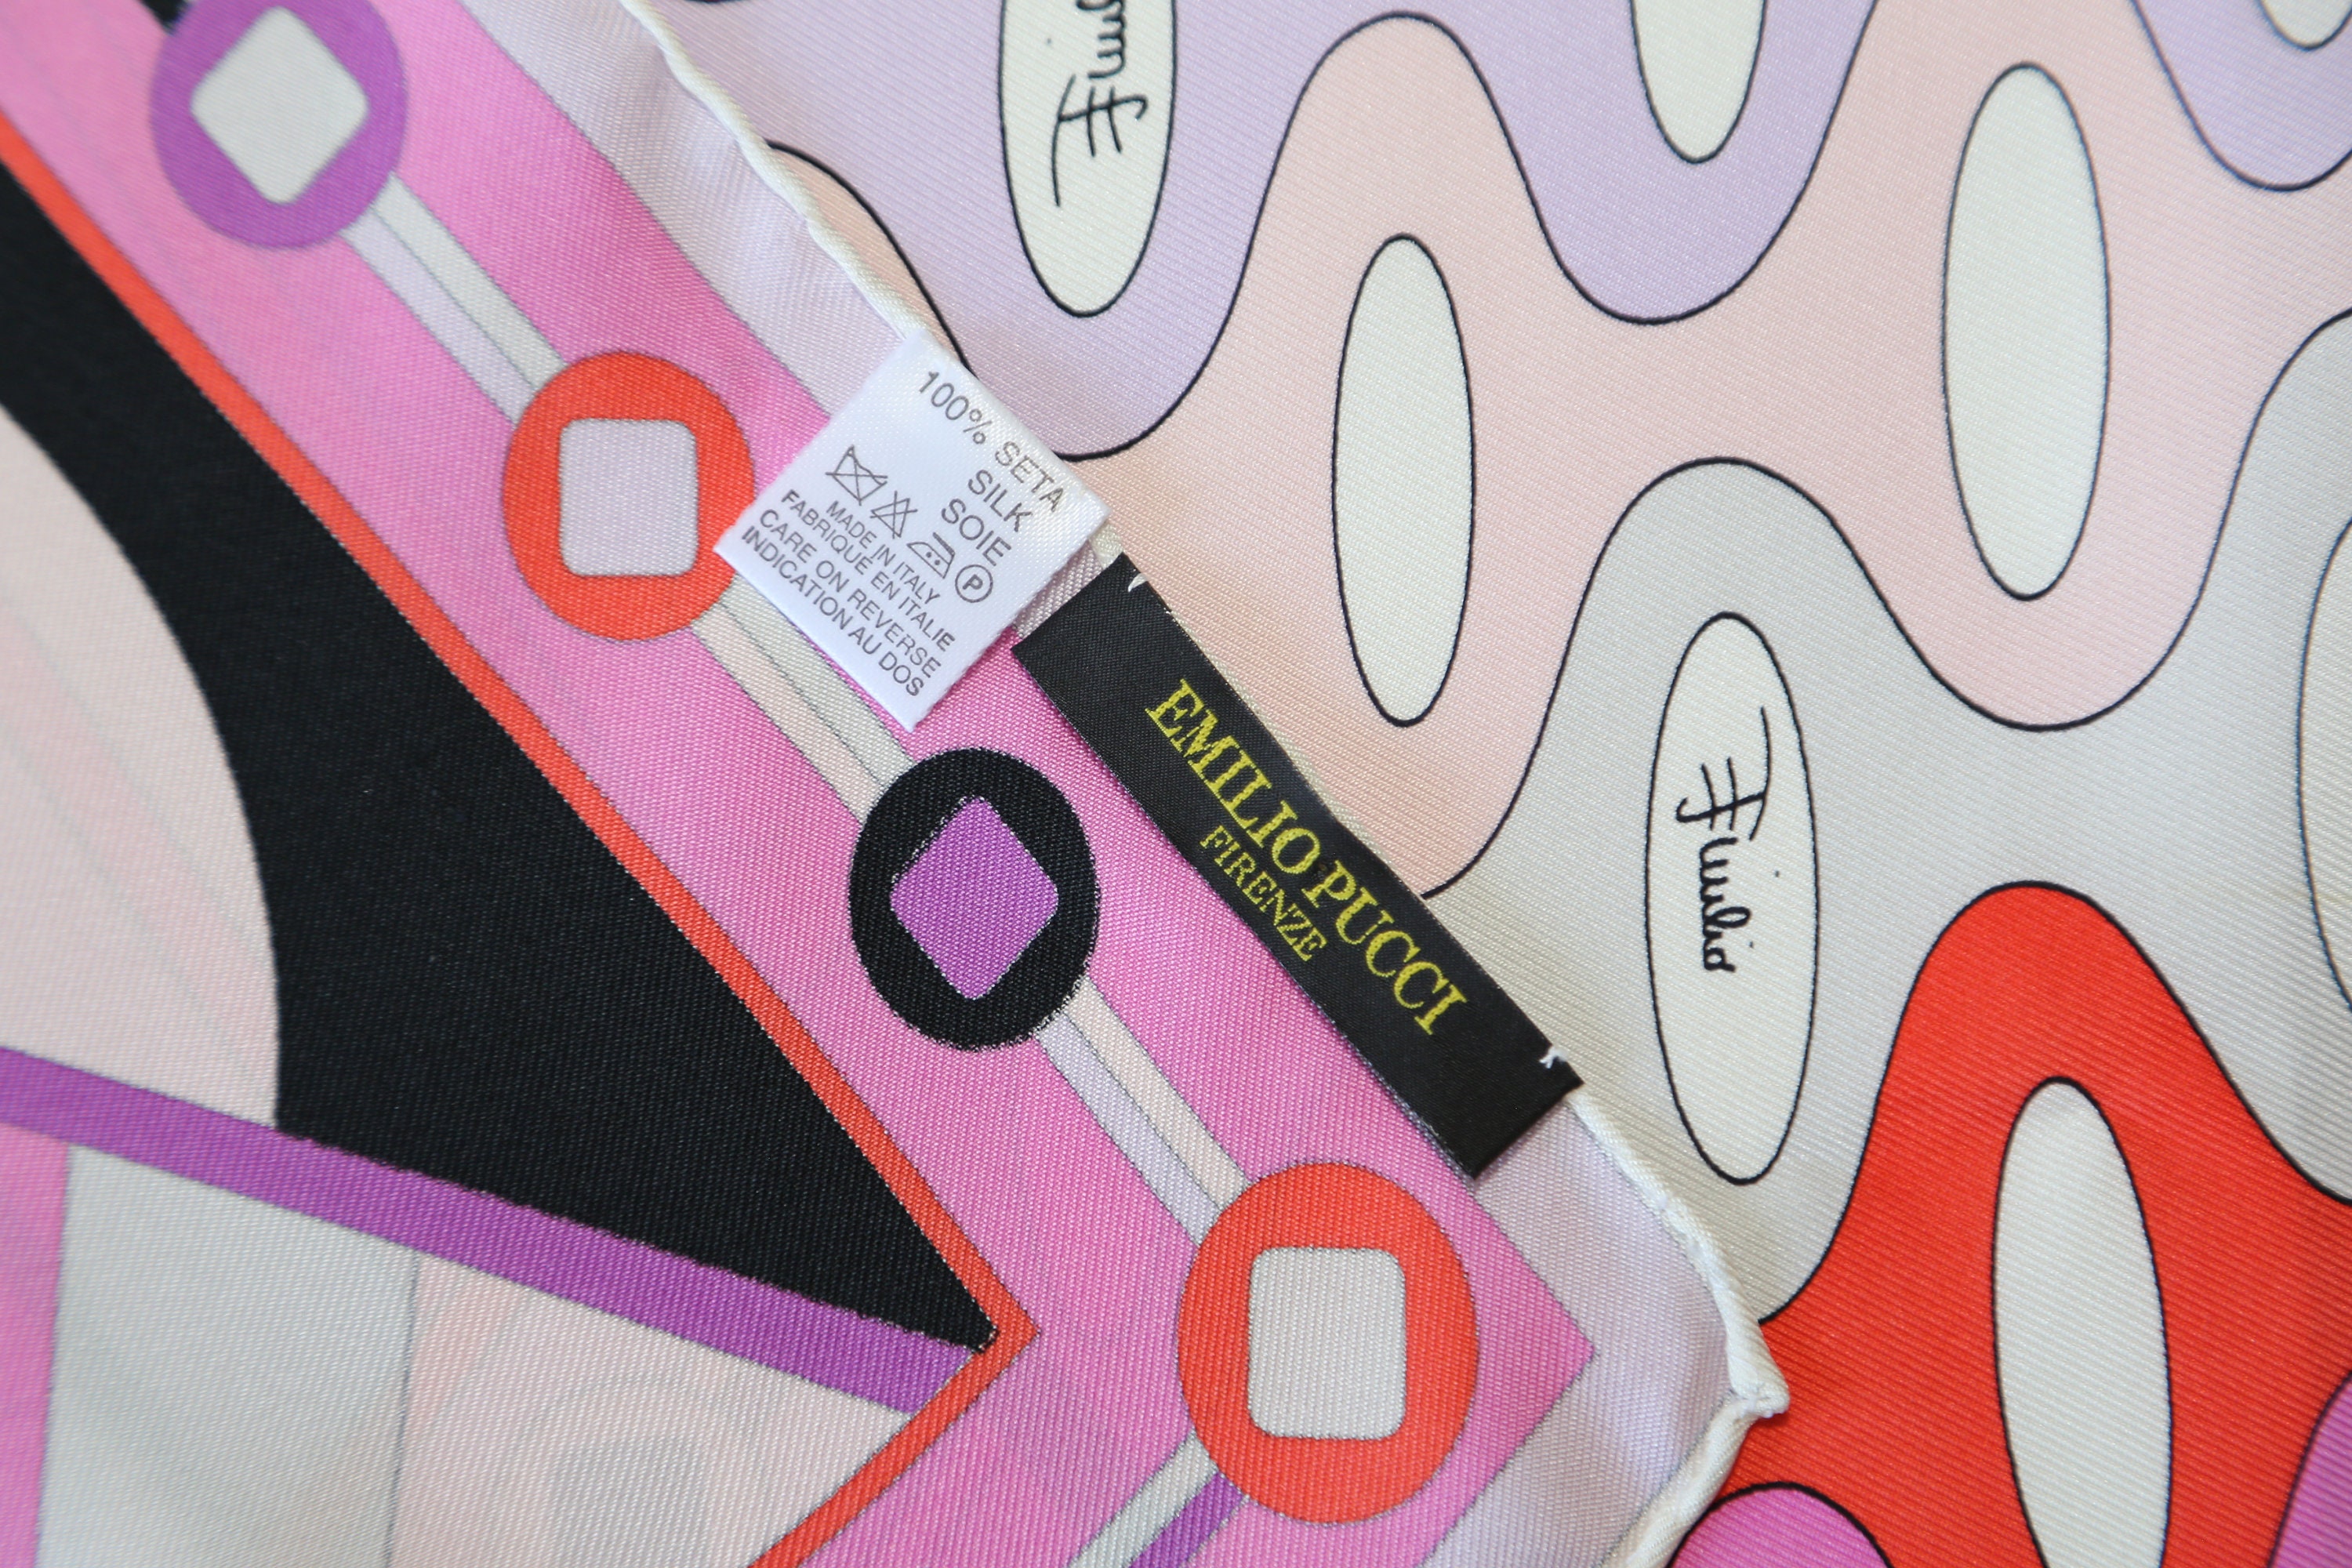 Authentic EMILIO PUCCI 100% silk square scarf vintage print abstract  geometric